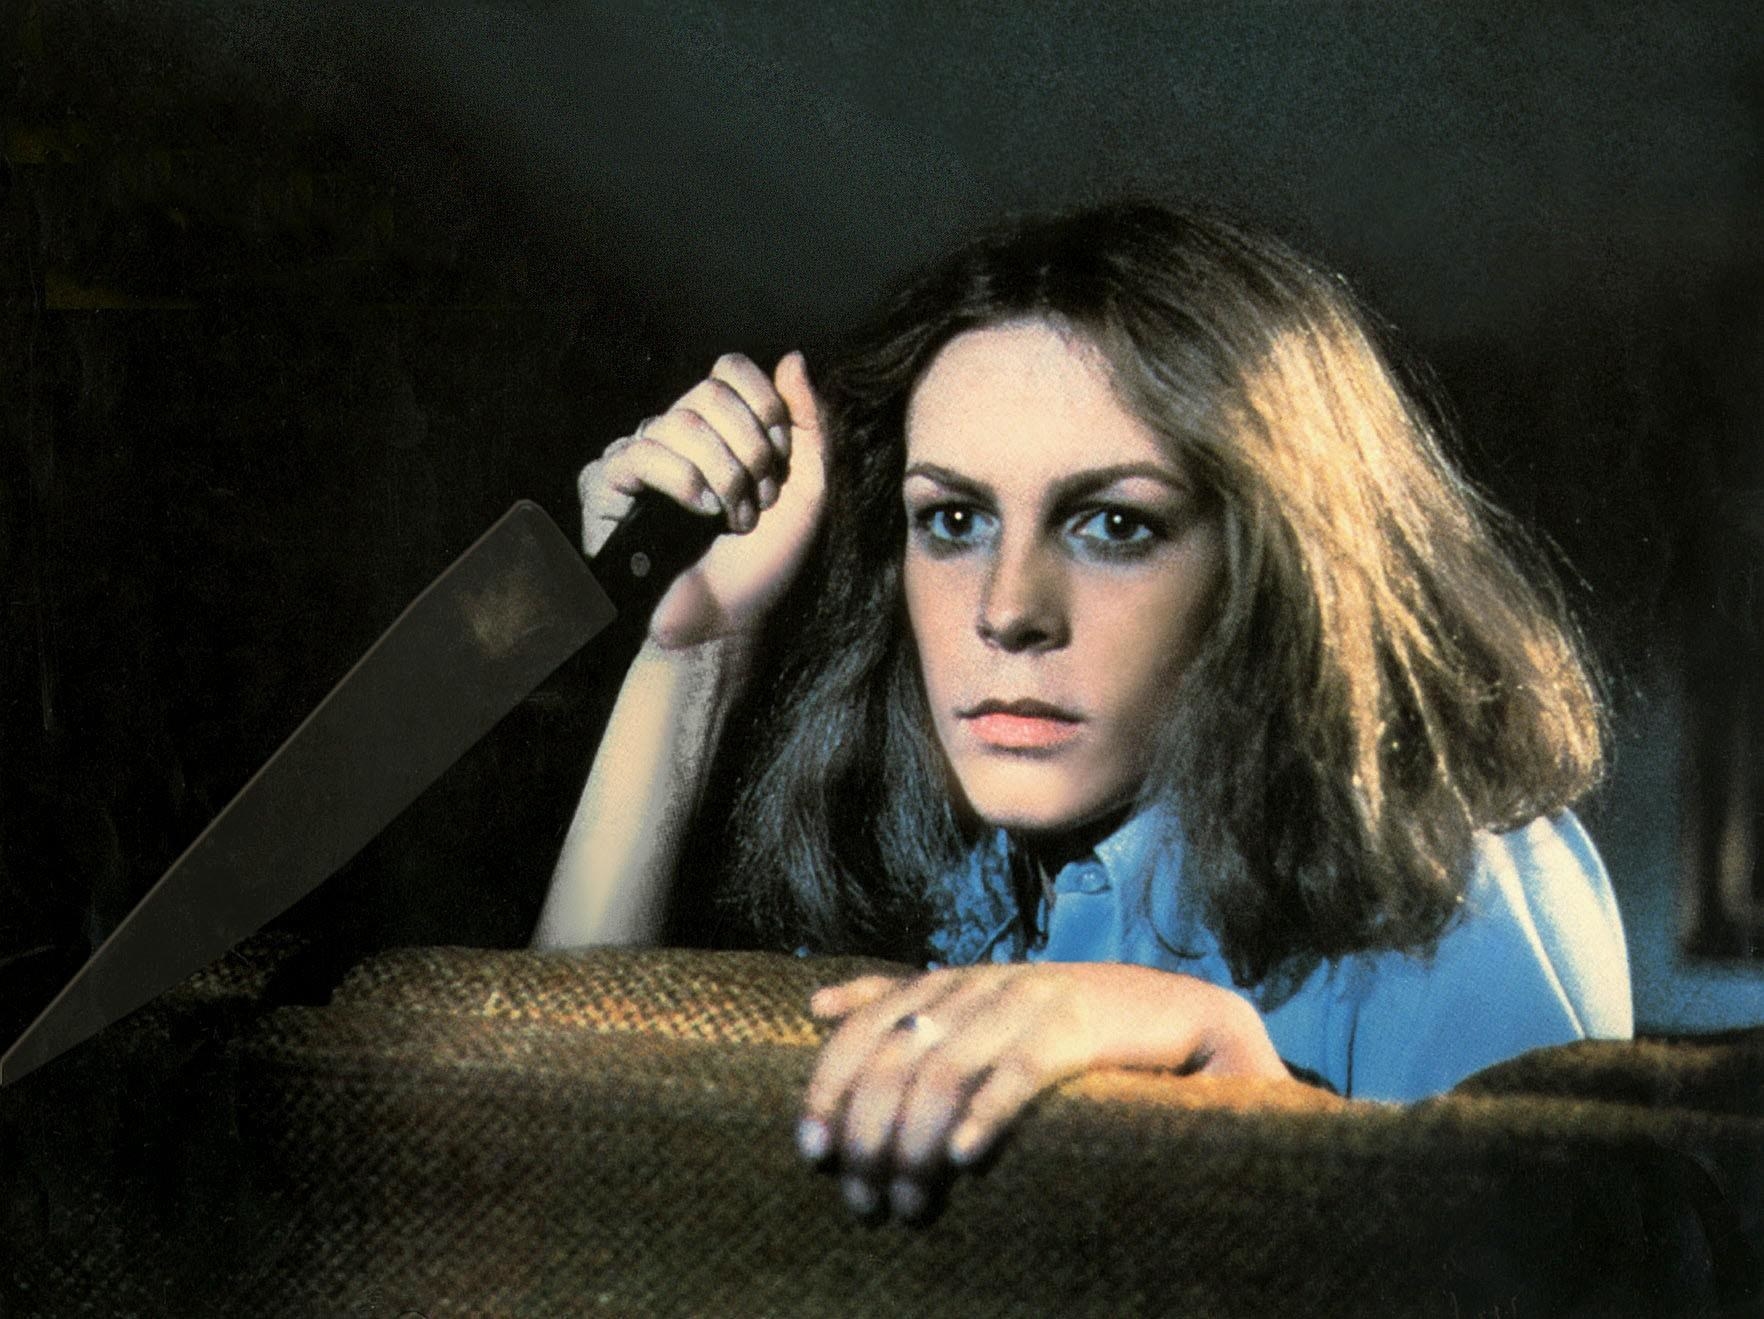 Laurie Strode holding a knife